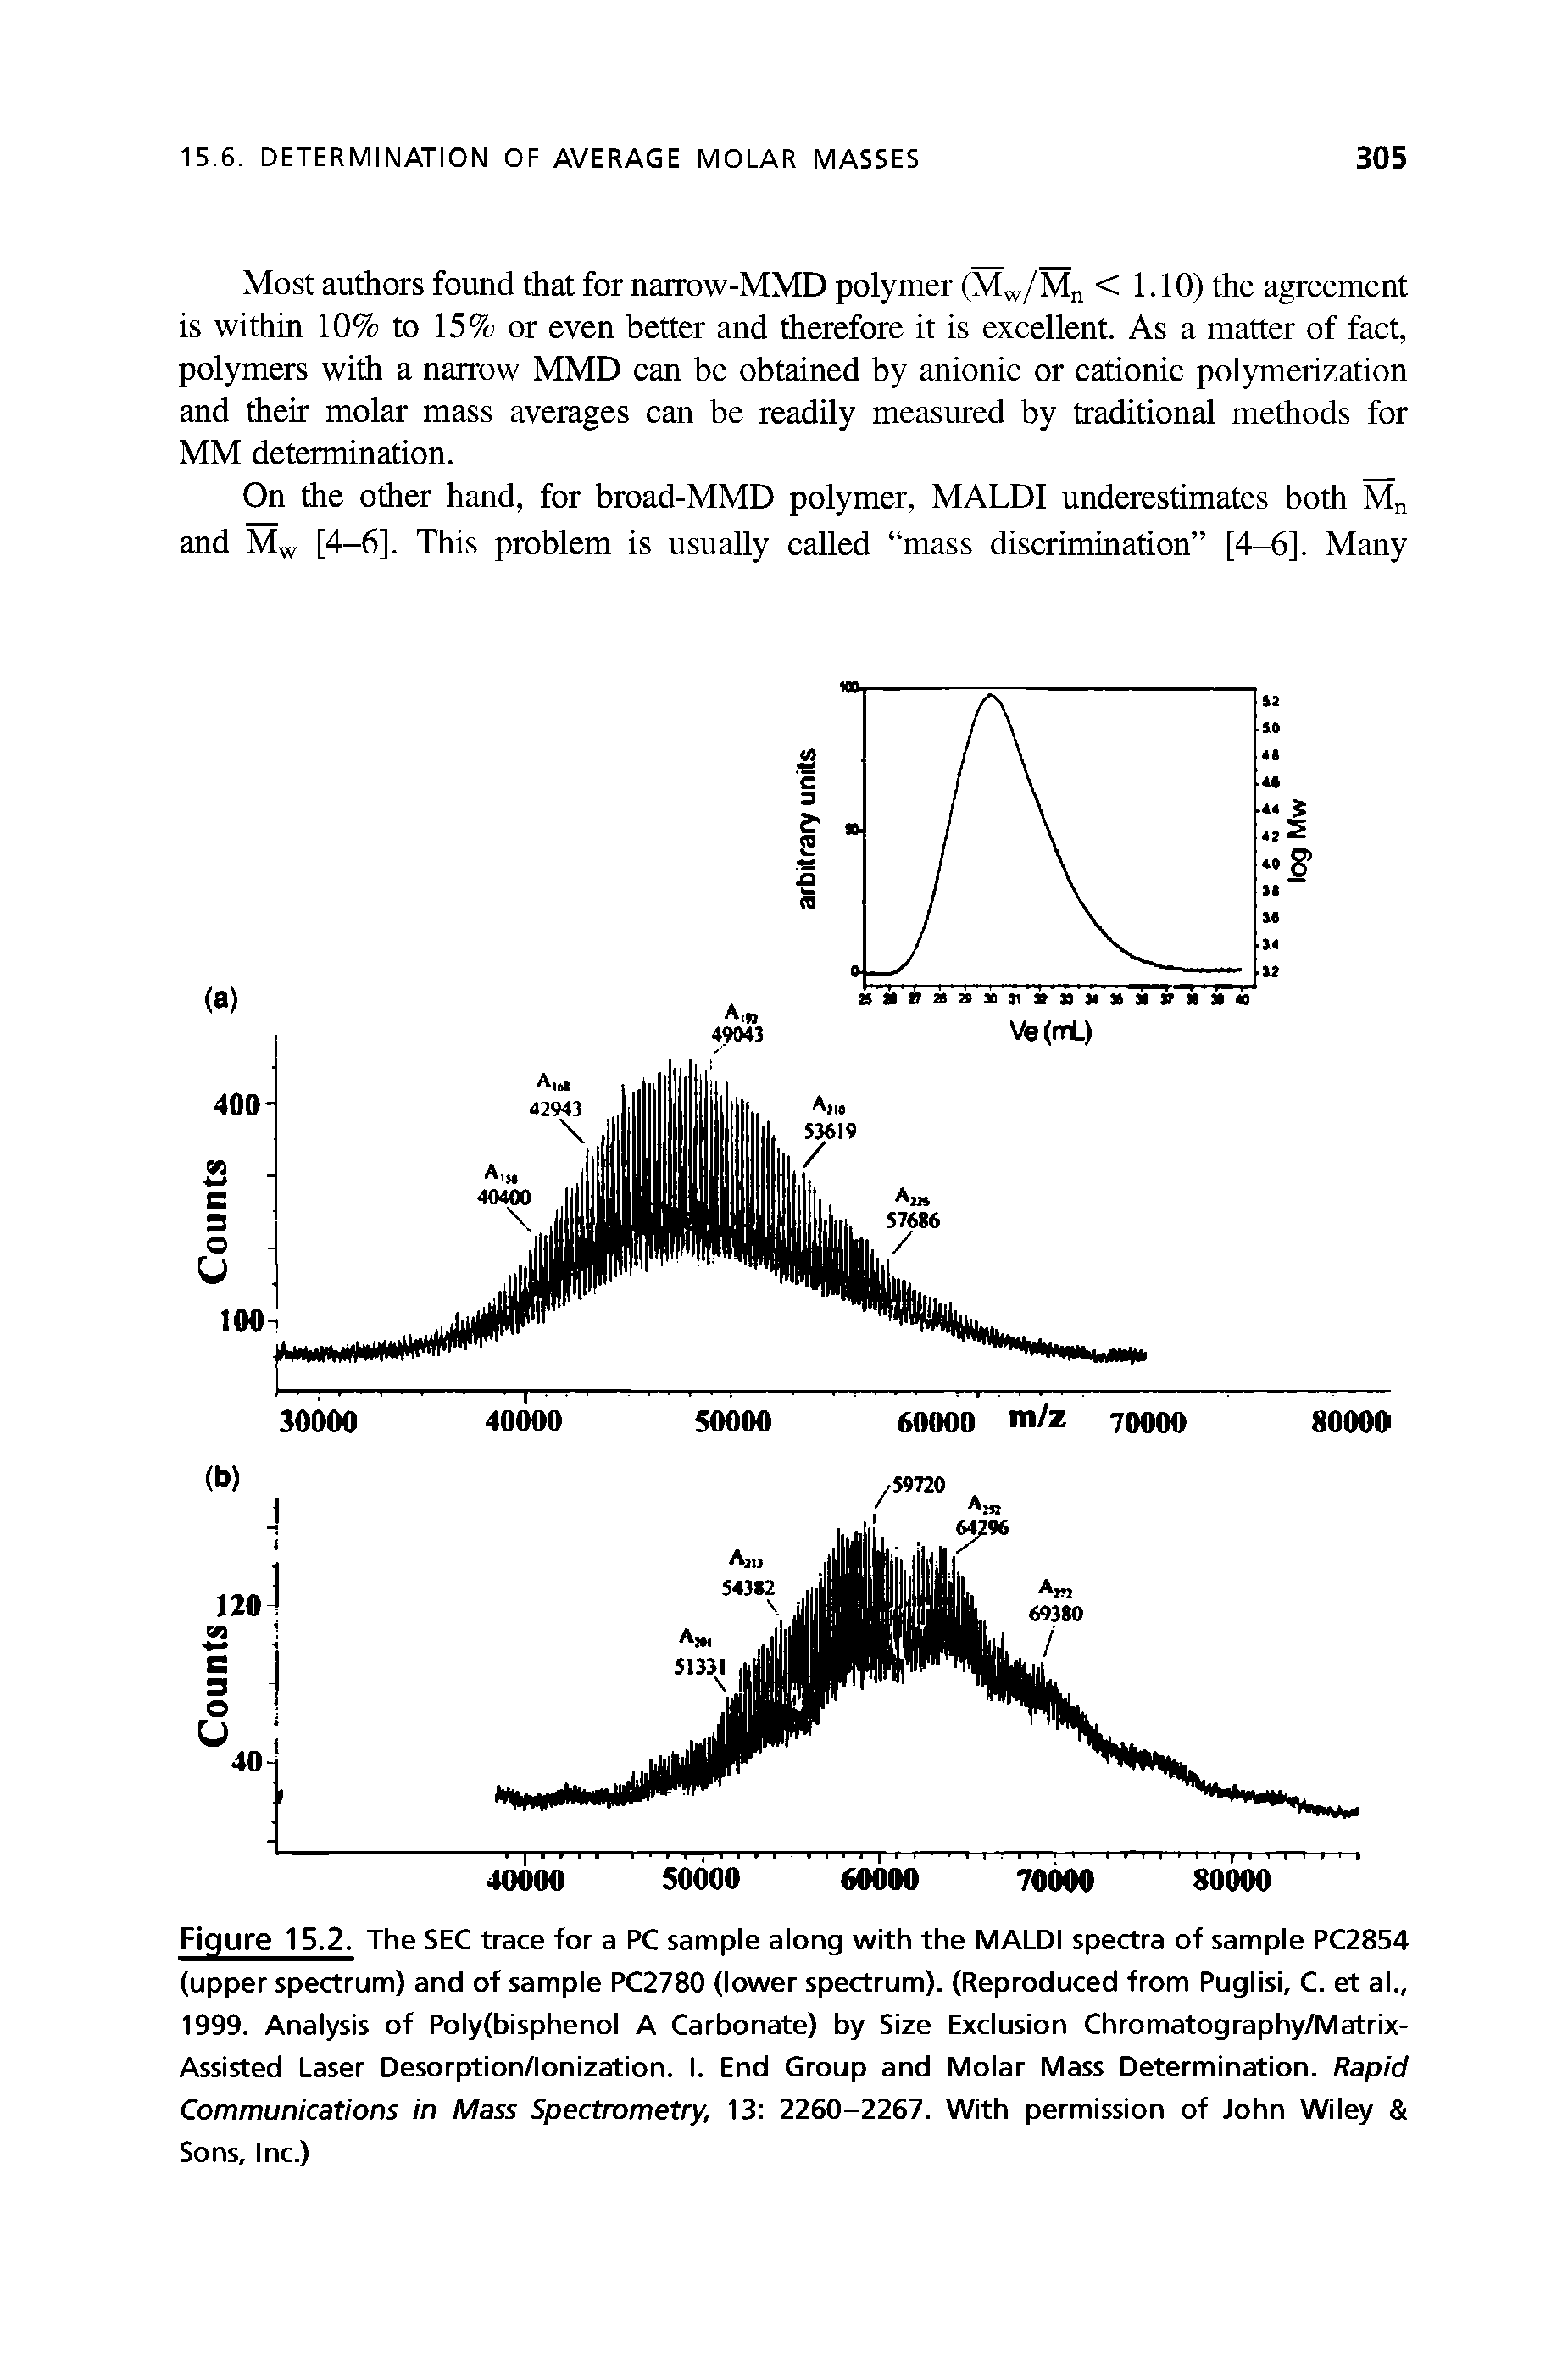 Figure 15.2. The SEC trace for a PC sample along with the MALDI spectra of sample PC2854 (upper spectrum) and of sample PC2780 (lower spectrum). (Reproduced from Puglisi, C. et al., 1999. Analysis of Poly(bisphenol A Carbonate) by Size Exclusion Chromatography/Matrix-Assisted Laser Desorption/lonization. I. End Group and Molar Mass Determination. Rapid Communications in Mass Spectrometry, 13 2260-2267. With permission of John Wiley Sons, Inc.)...